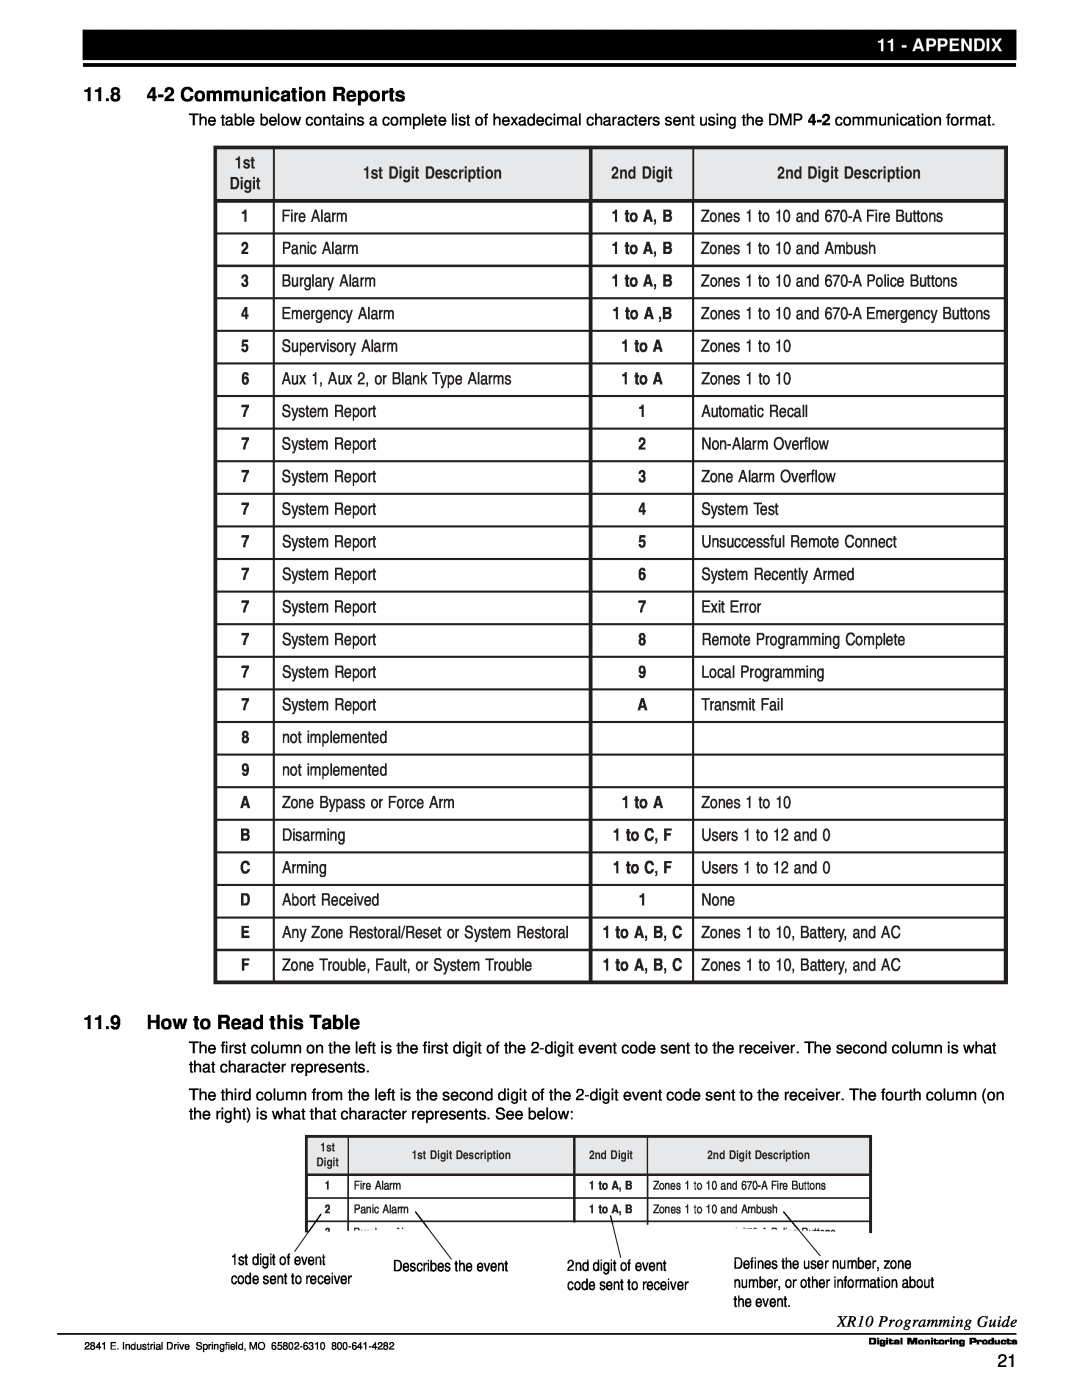 DMP Electronics Command Processor Panel 11.84-2Communication Reports, 11.9How to Read this Table, Appendix, 2nd Digit 